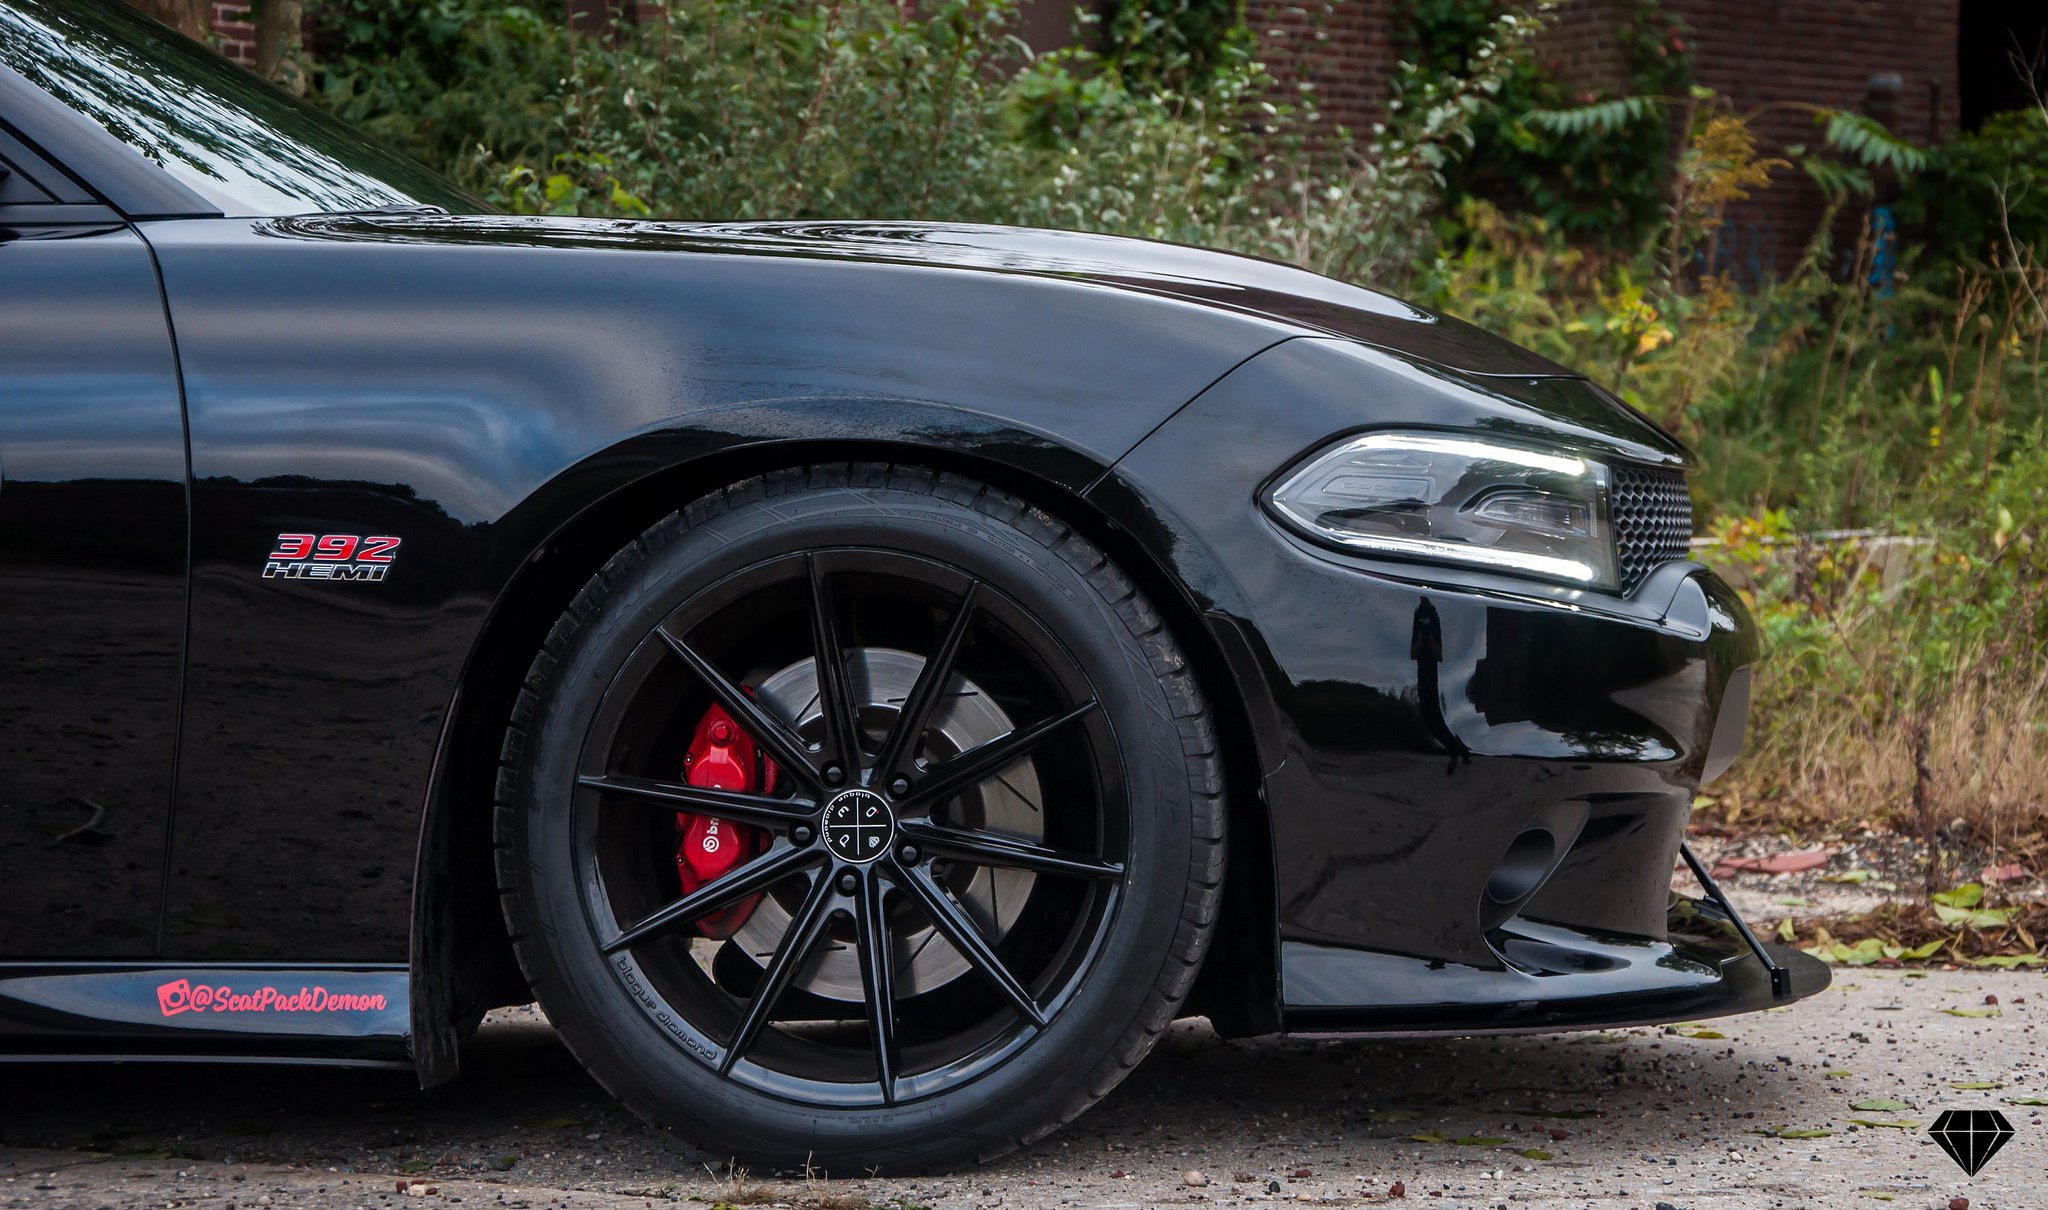 Dodge Charger Scap Pack with 20 Inch Blaque Diamond Rims - Photo by Blaque Diamond Wheels